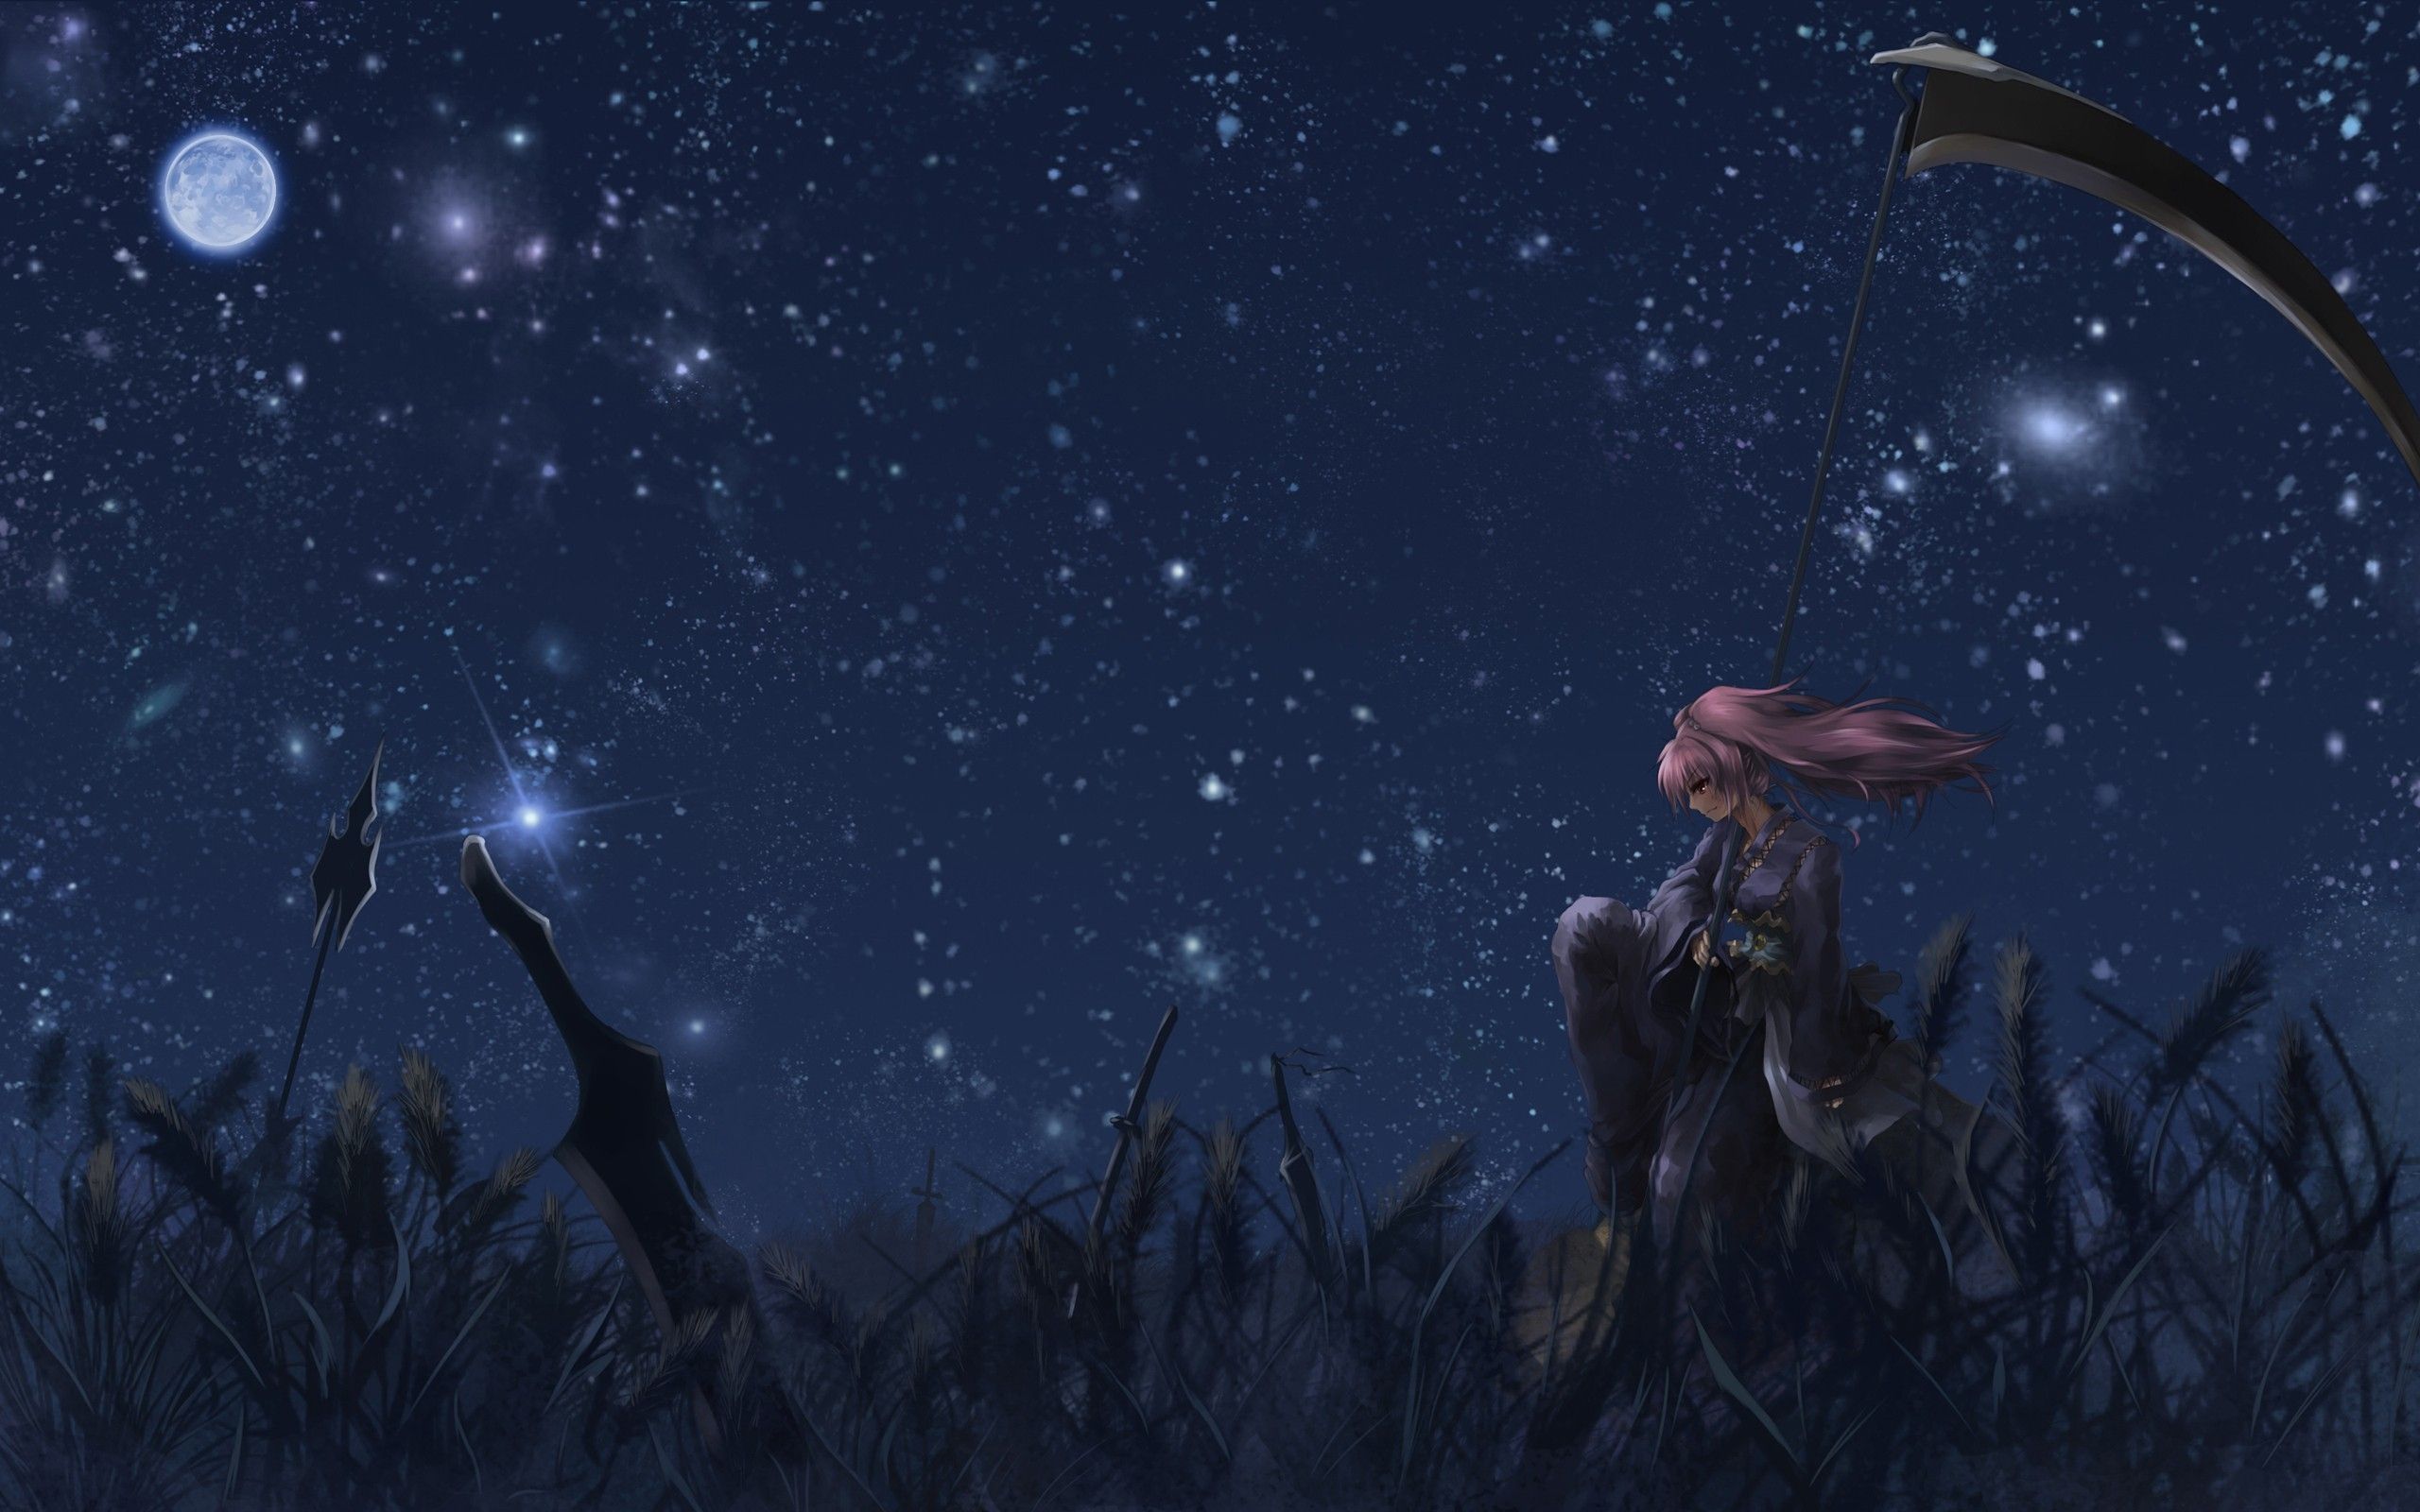 Download Wallpaper, Download 2560x1600 women video games nature touhou night stars scythe redheads grass long hair weapons plants shinigami Wallpaper –Free Wallpaper Download